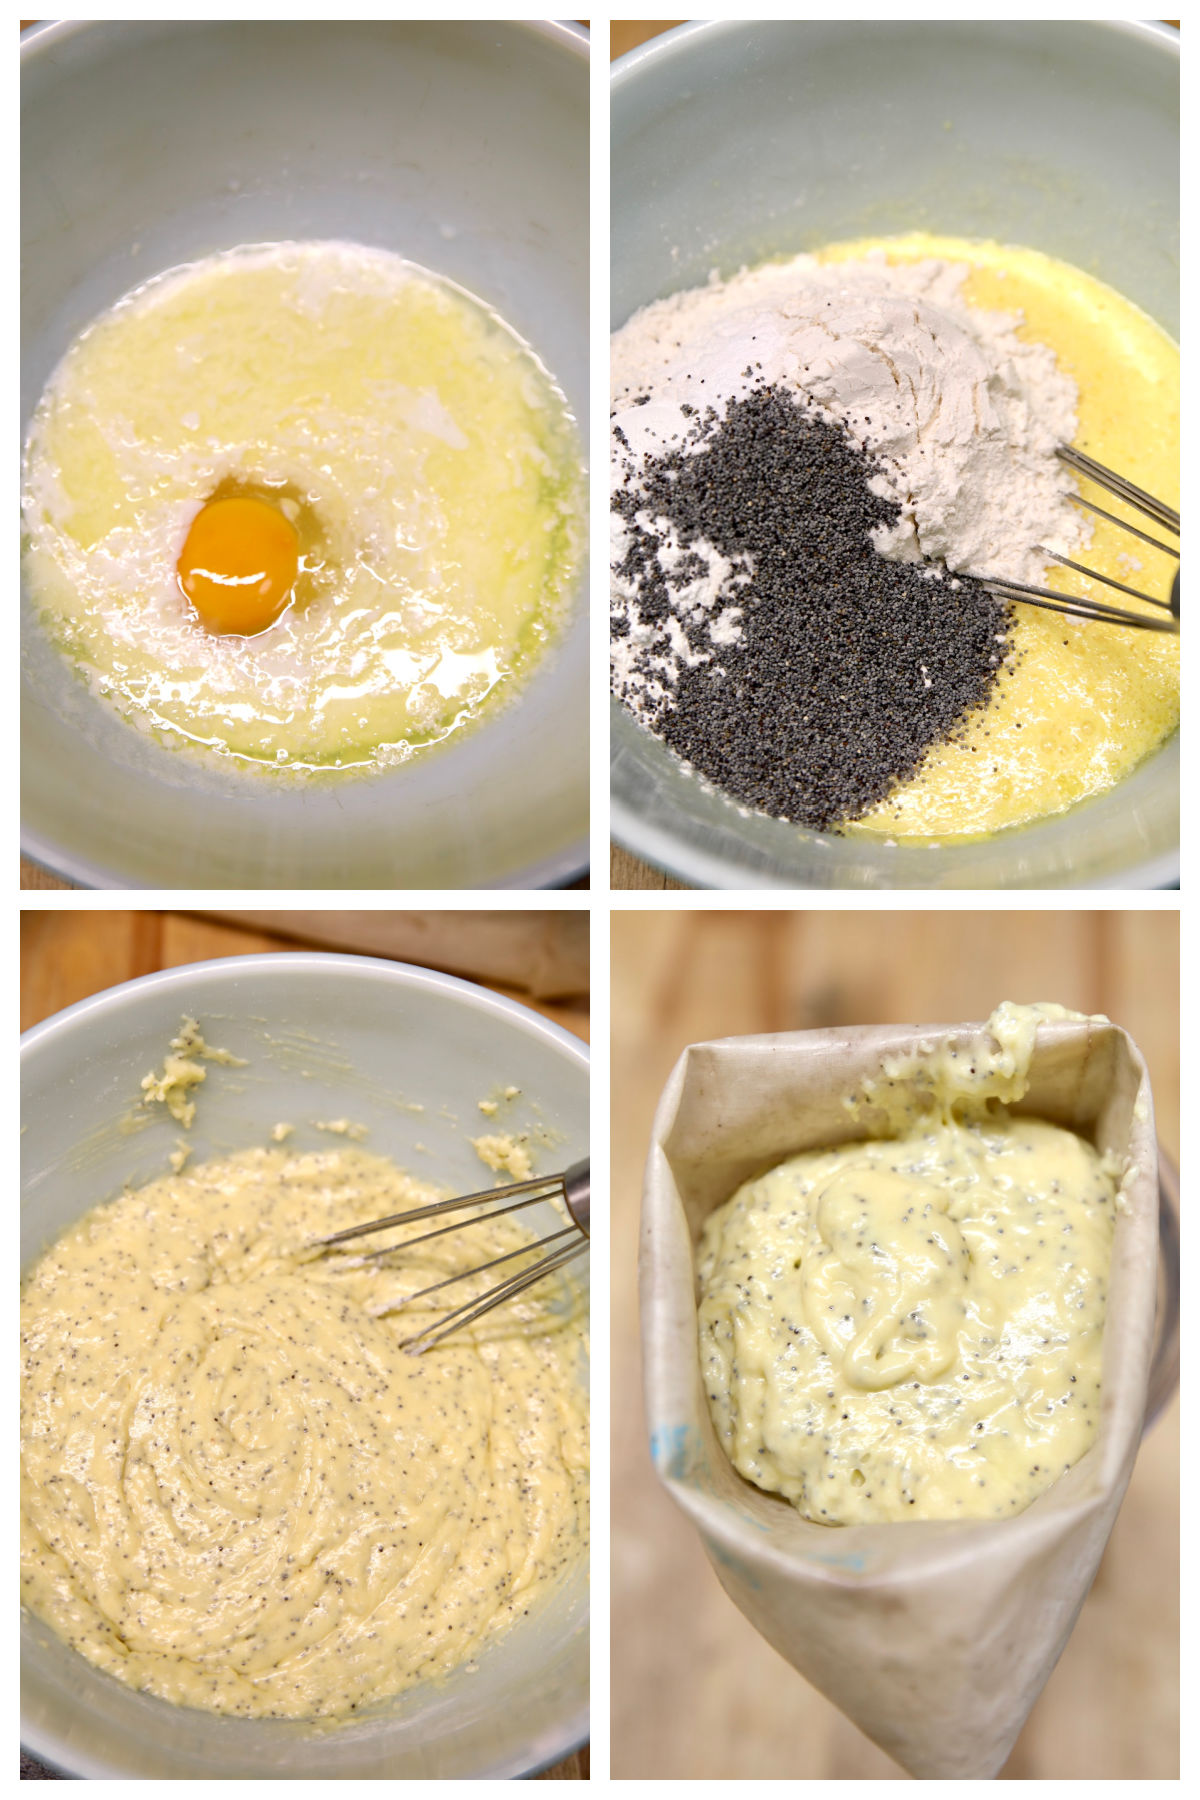 Collage: Mixing lemon poppy seed batter for donuts.